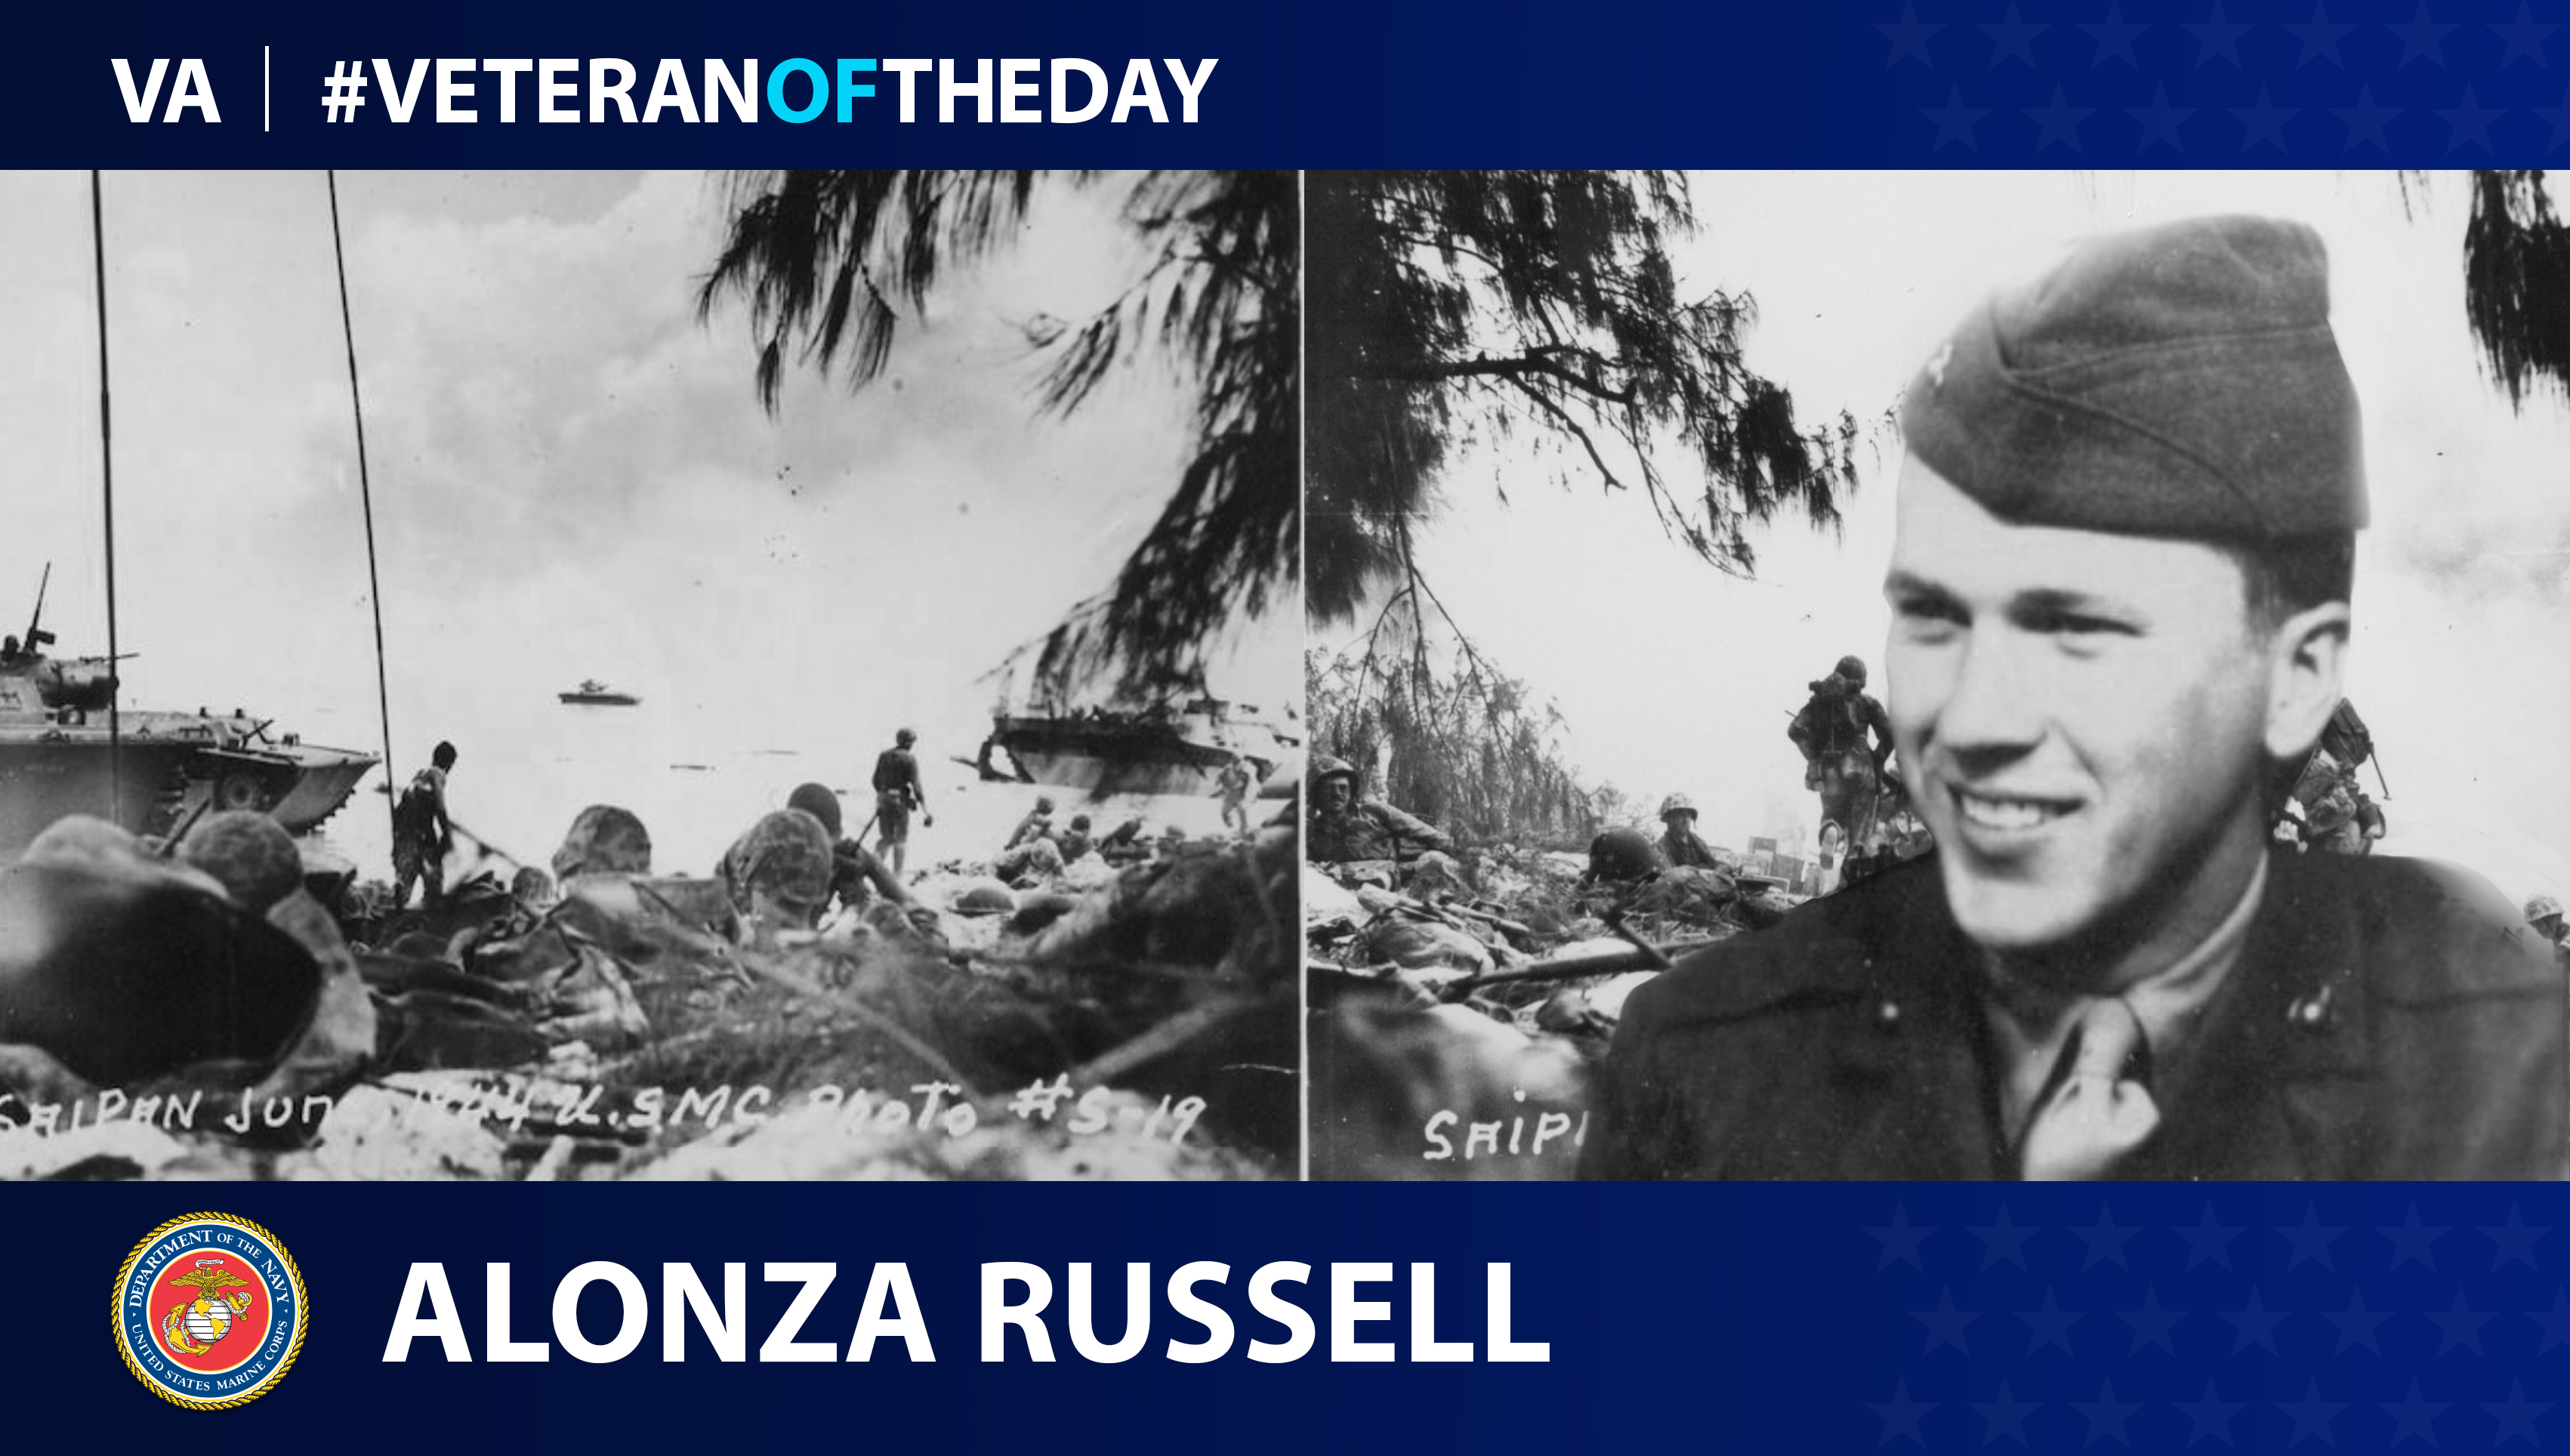 Alonza Russell is today's Veteran of the Day.